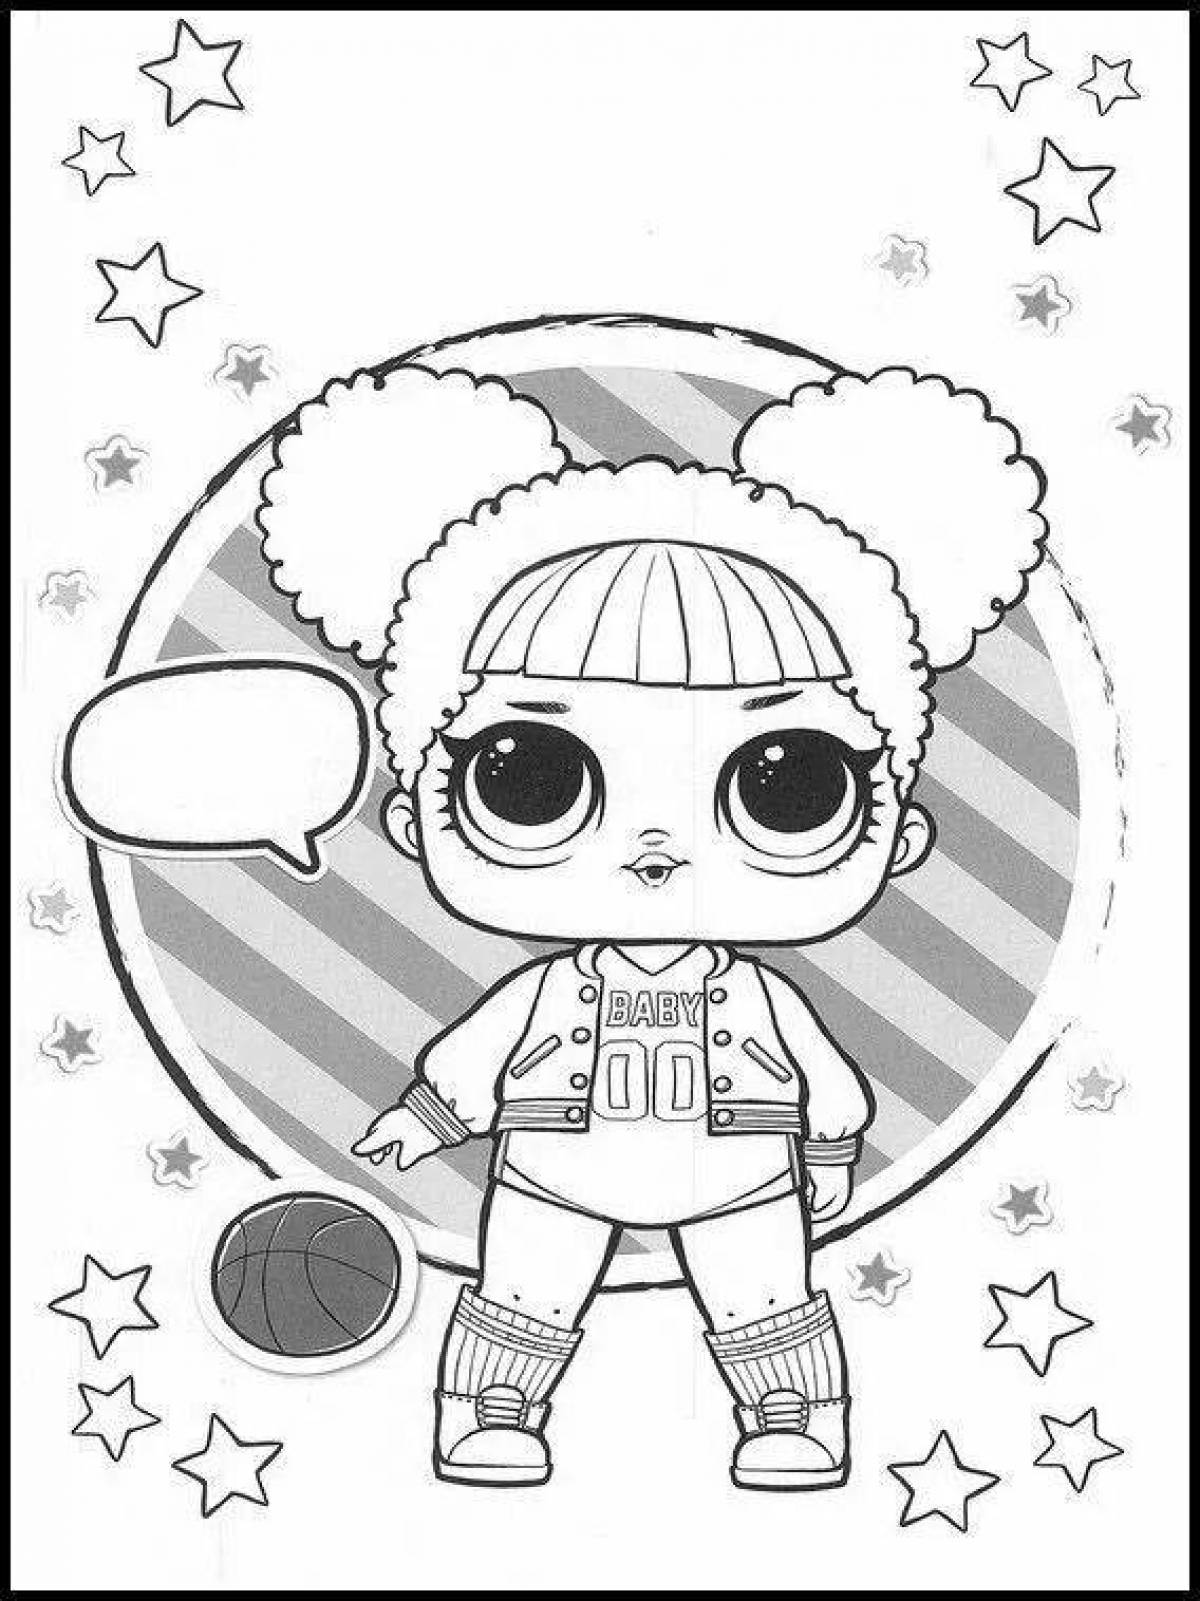 Radiant lol new year coloring page